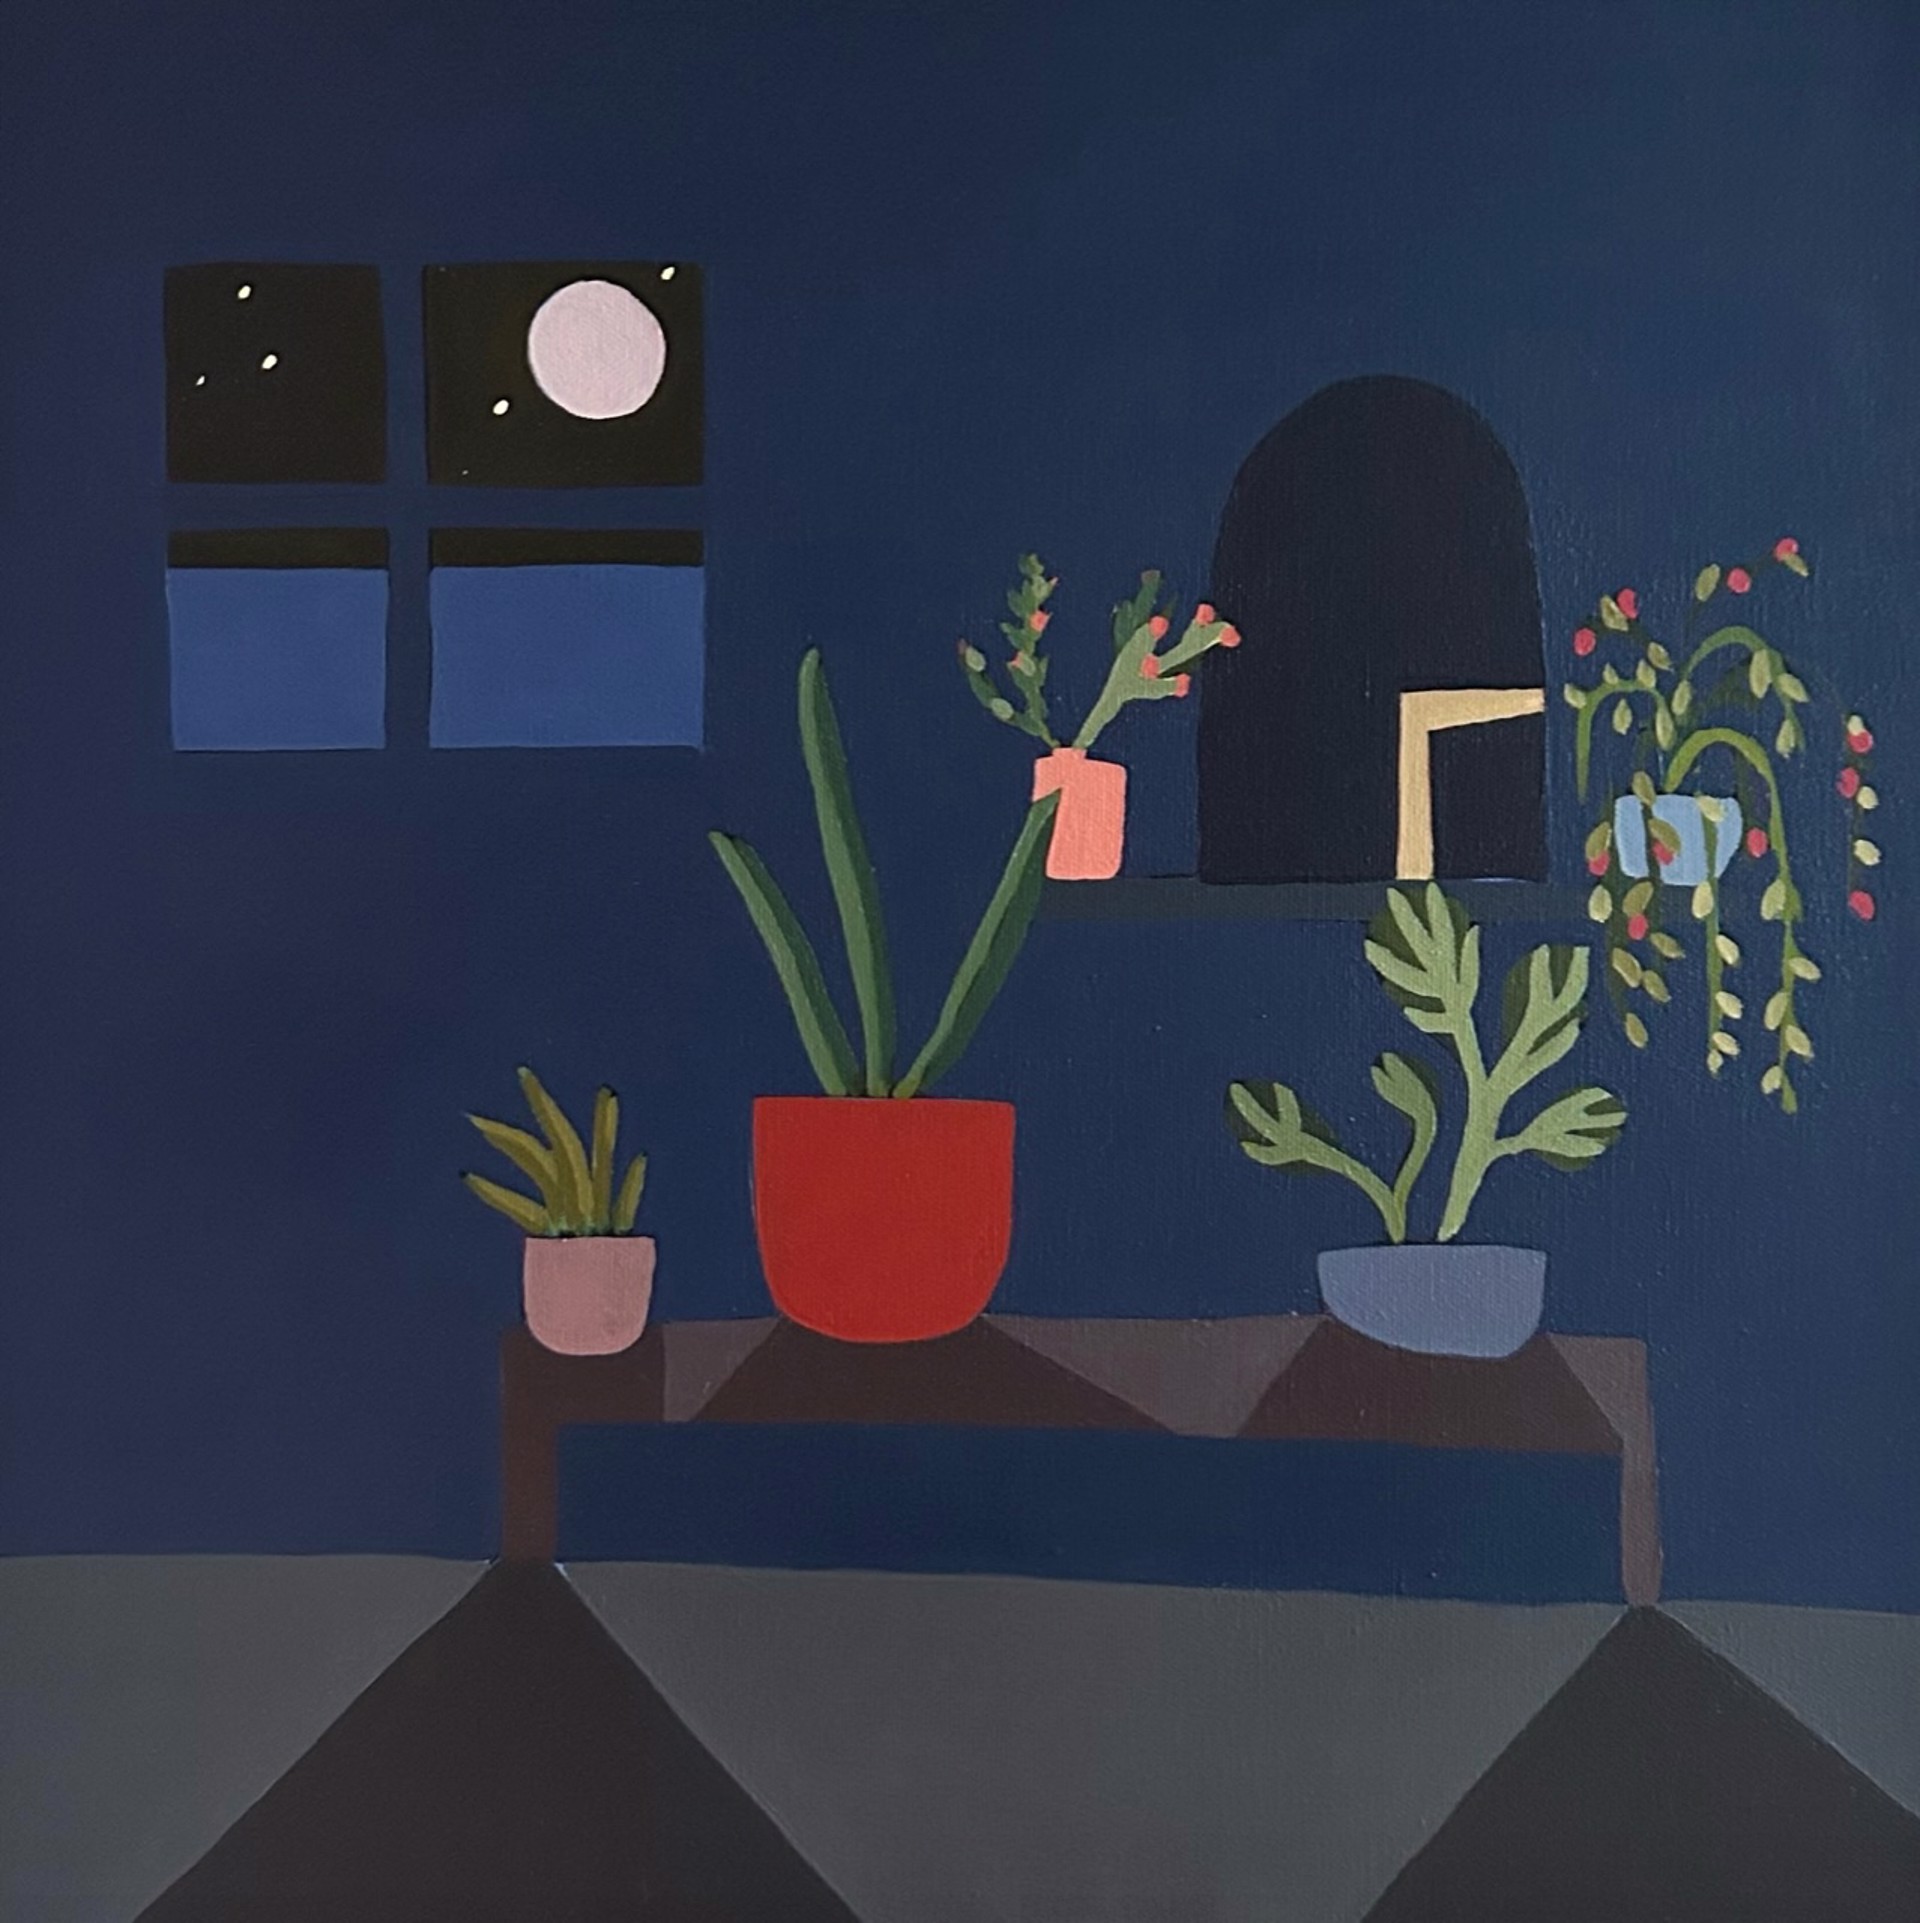 Room at Night with Red Planter by Sage Tucker-Ketcham